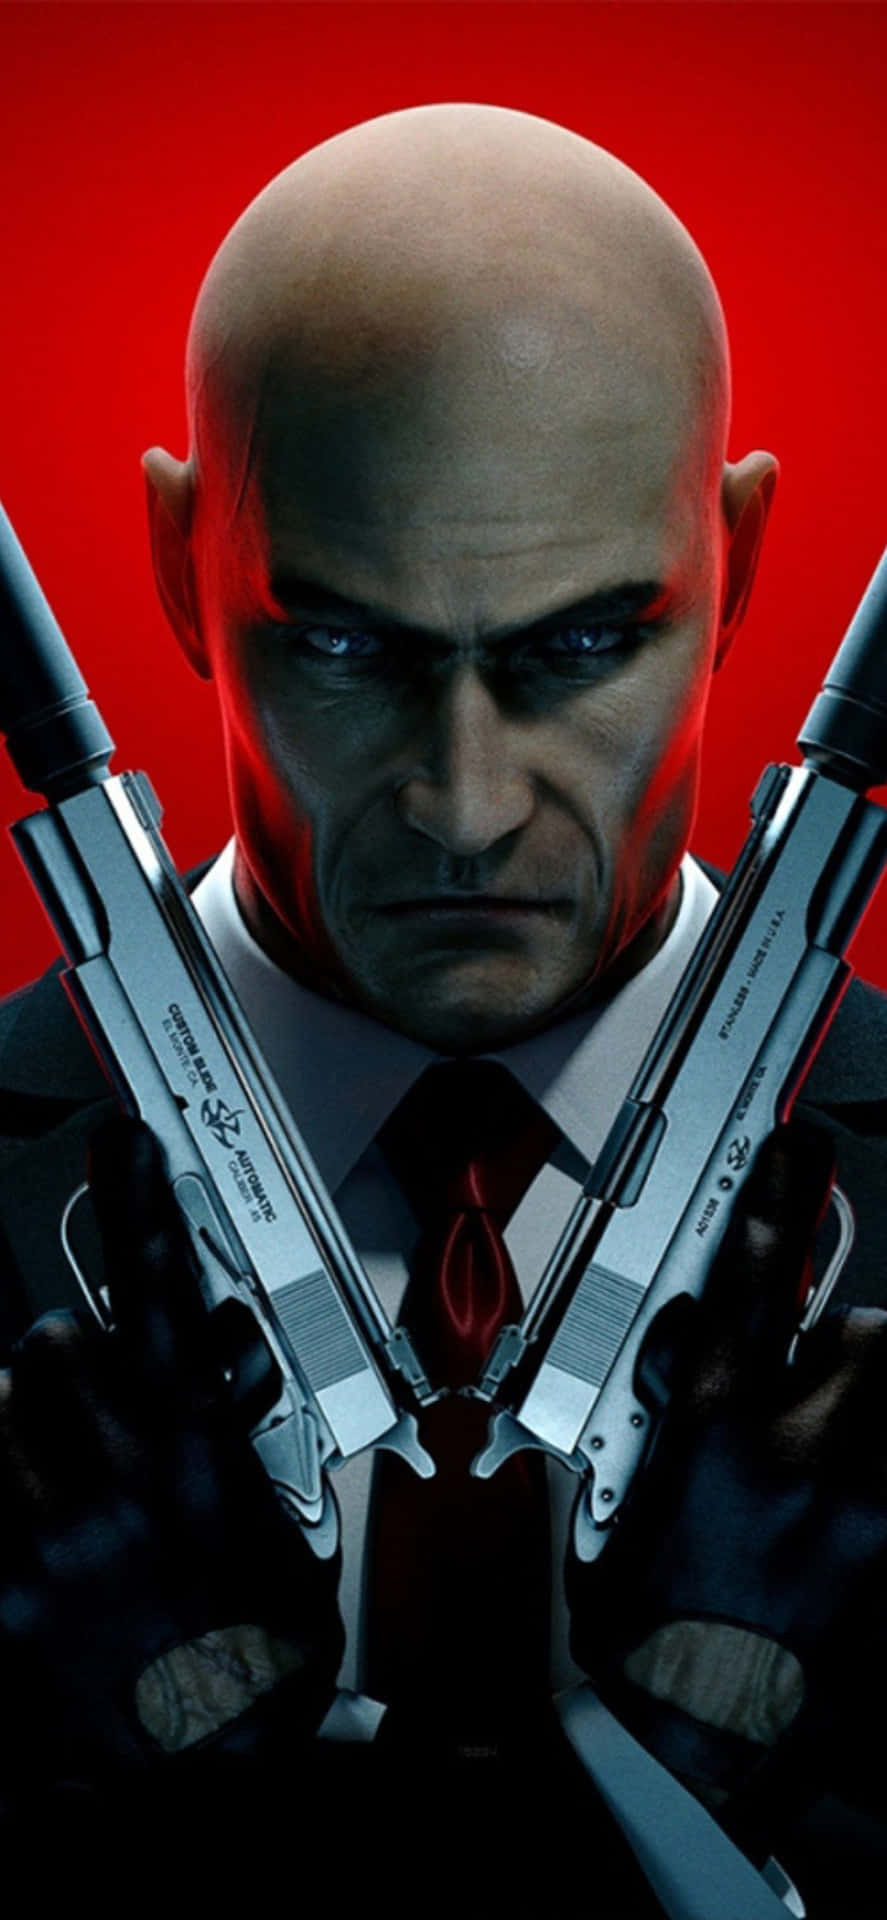 Blast into Hitman Absolution with your Iphone X